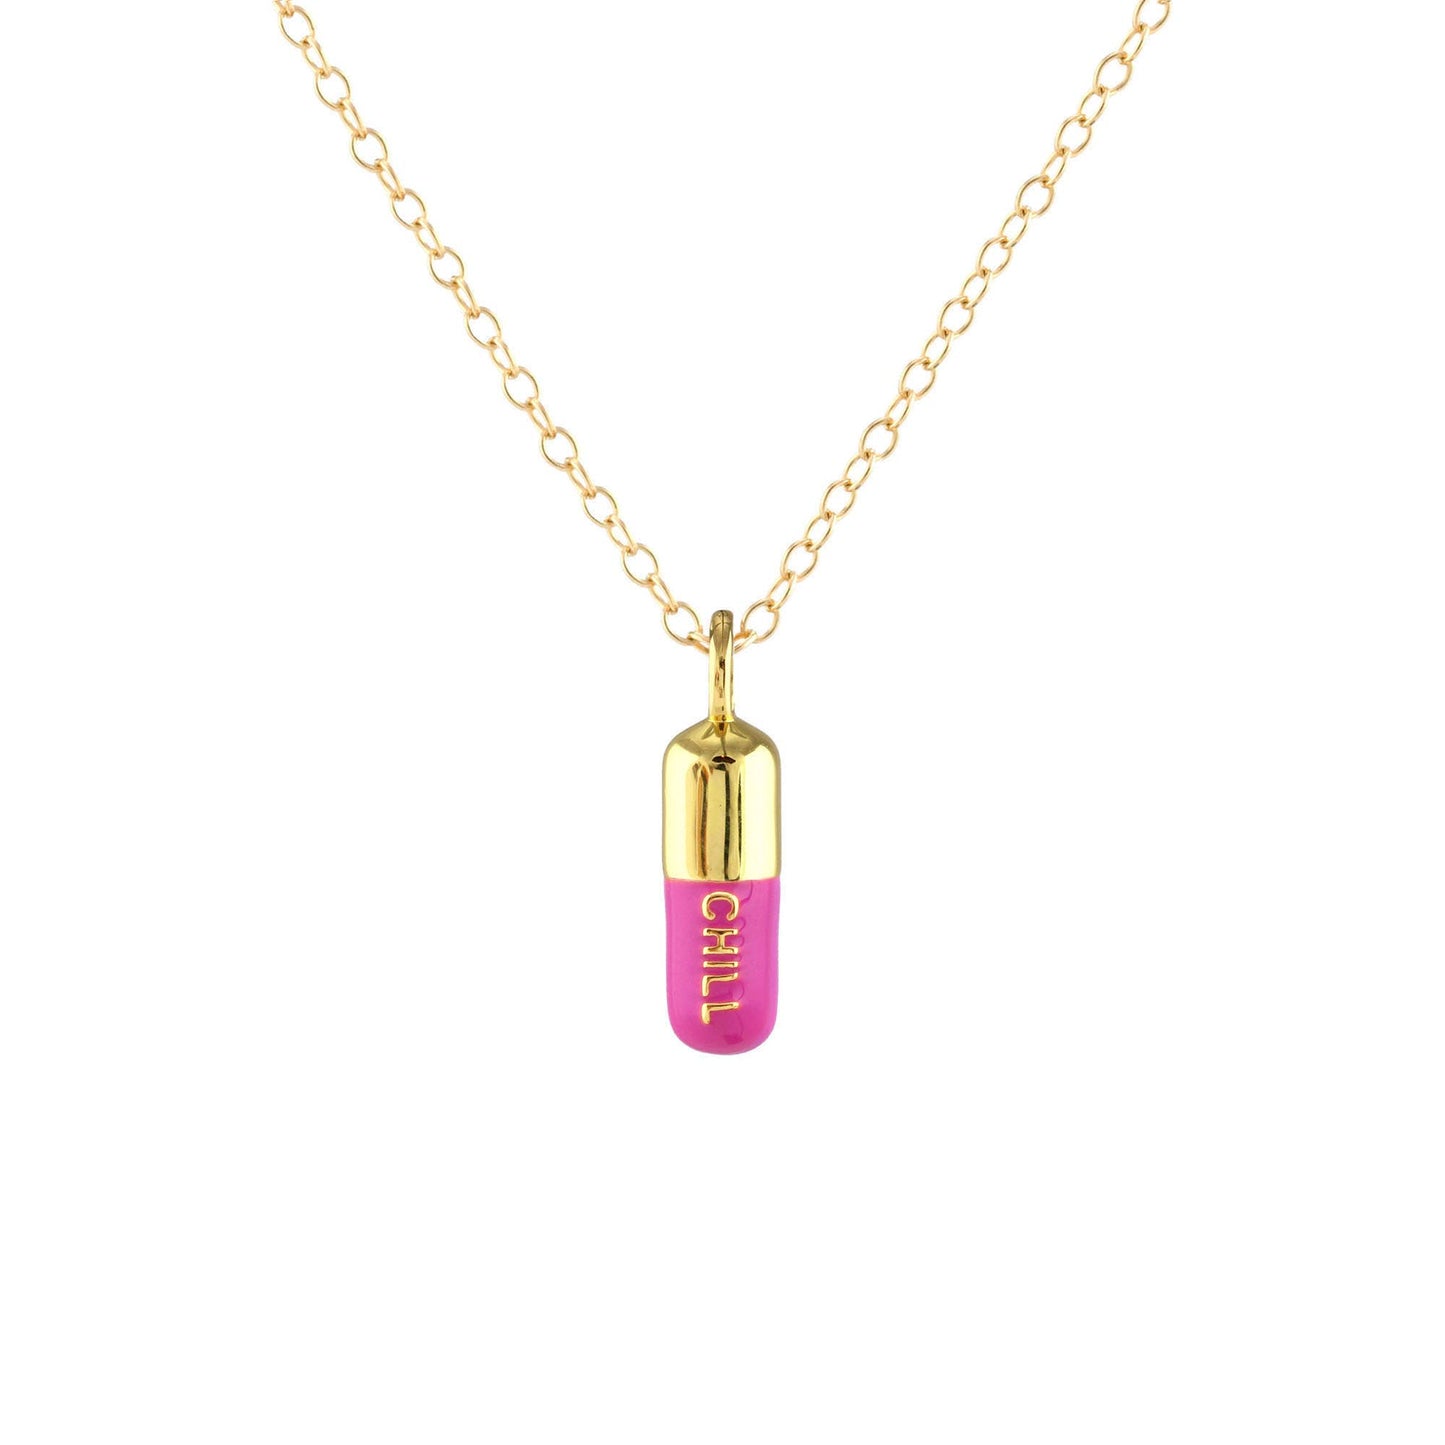 Chill Pill Enamel Necklace: Pink Sky